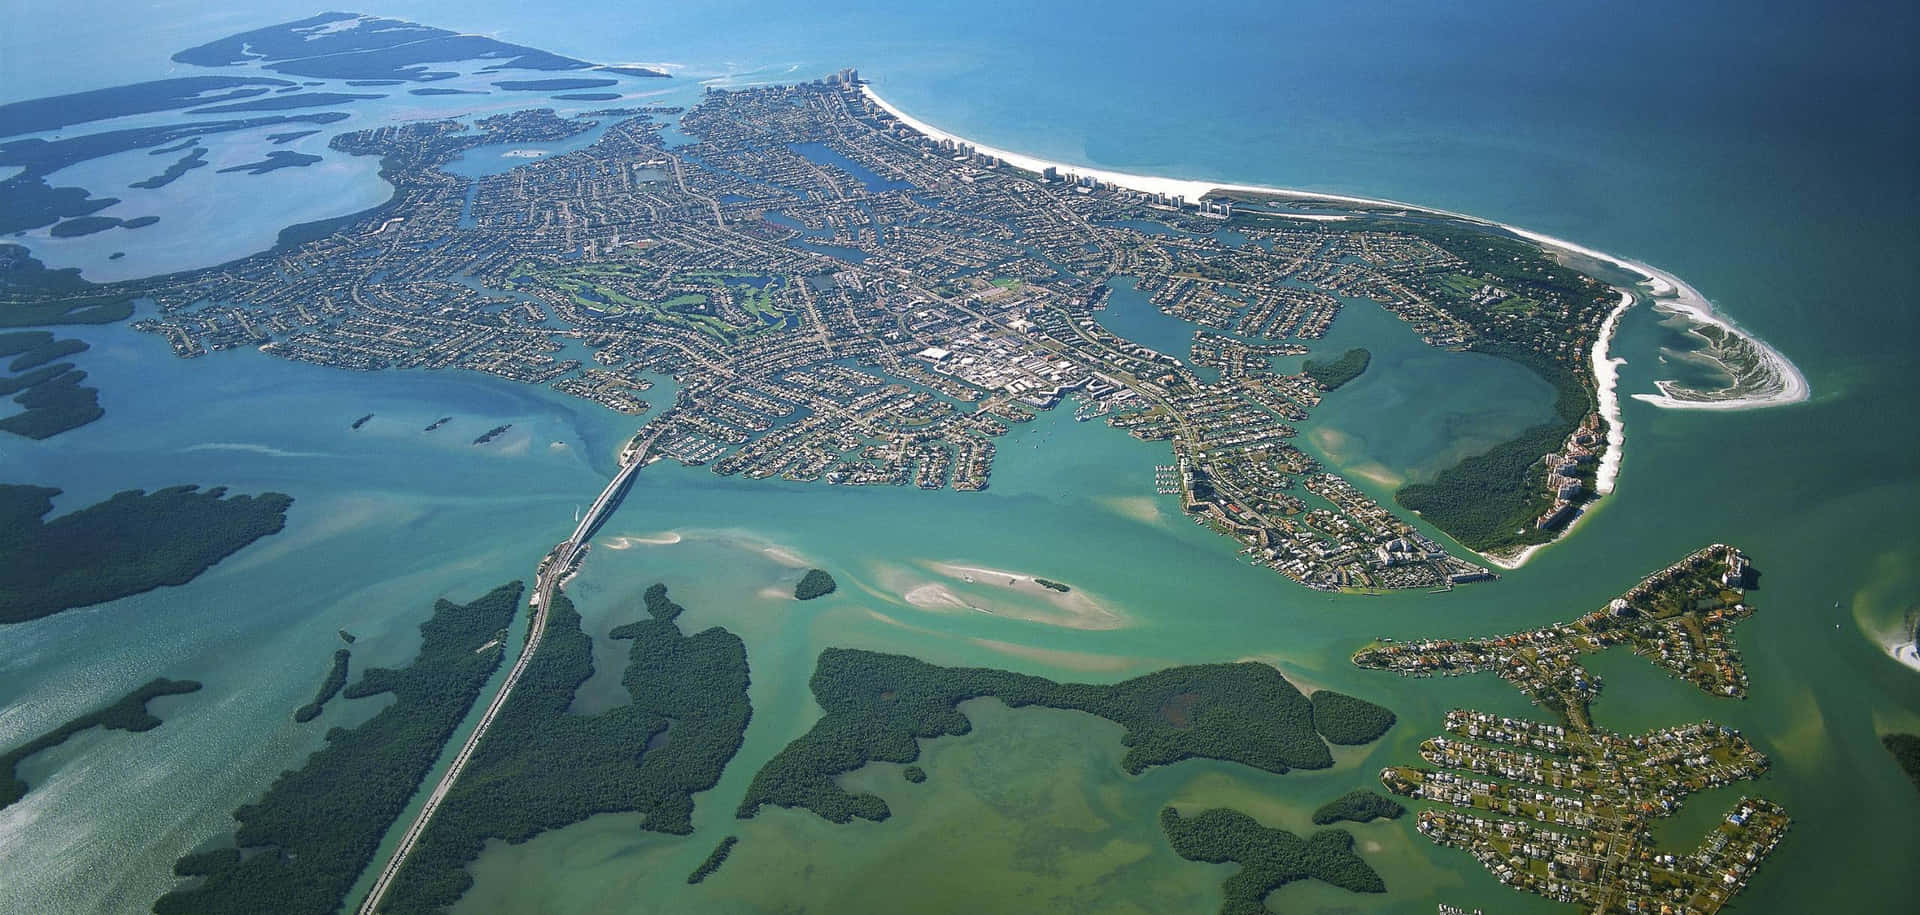 A picture perfect view of Marco Island, Florida